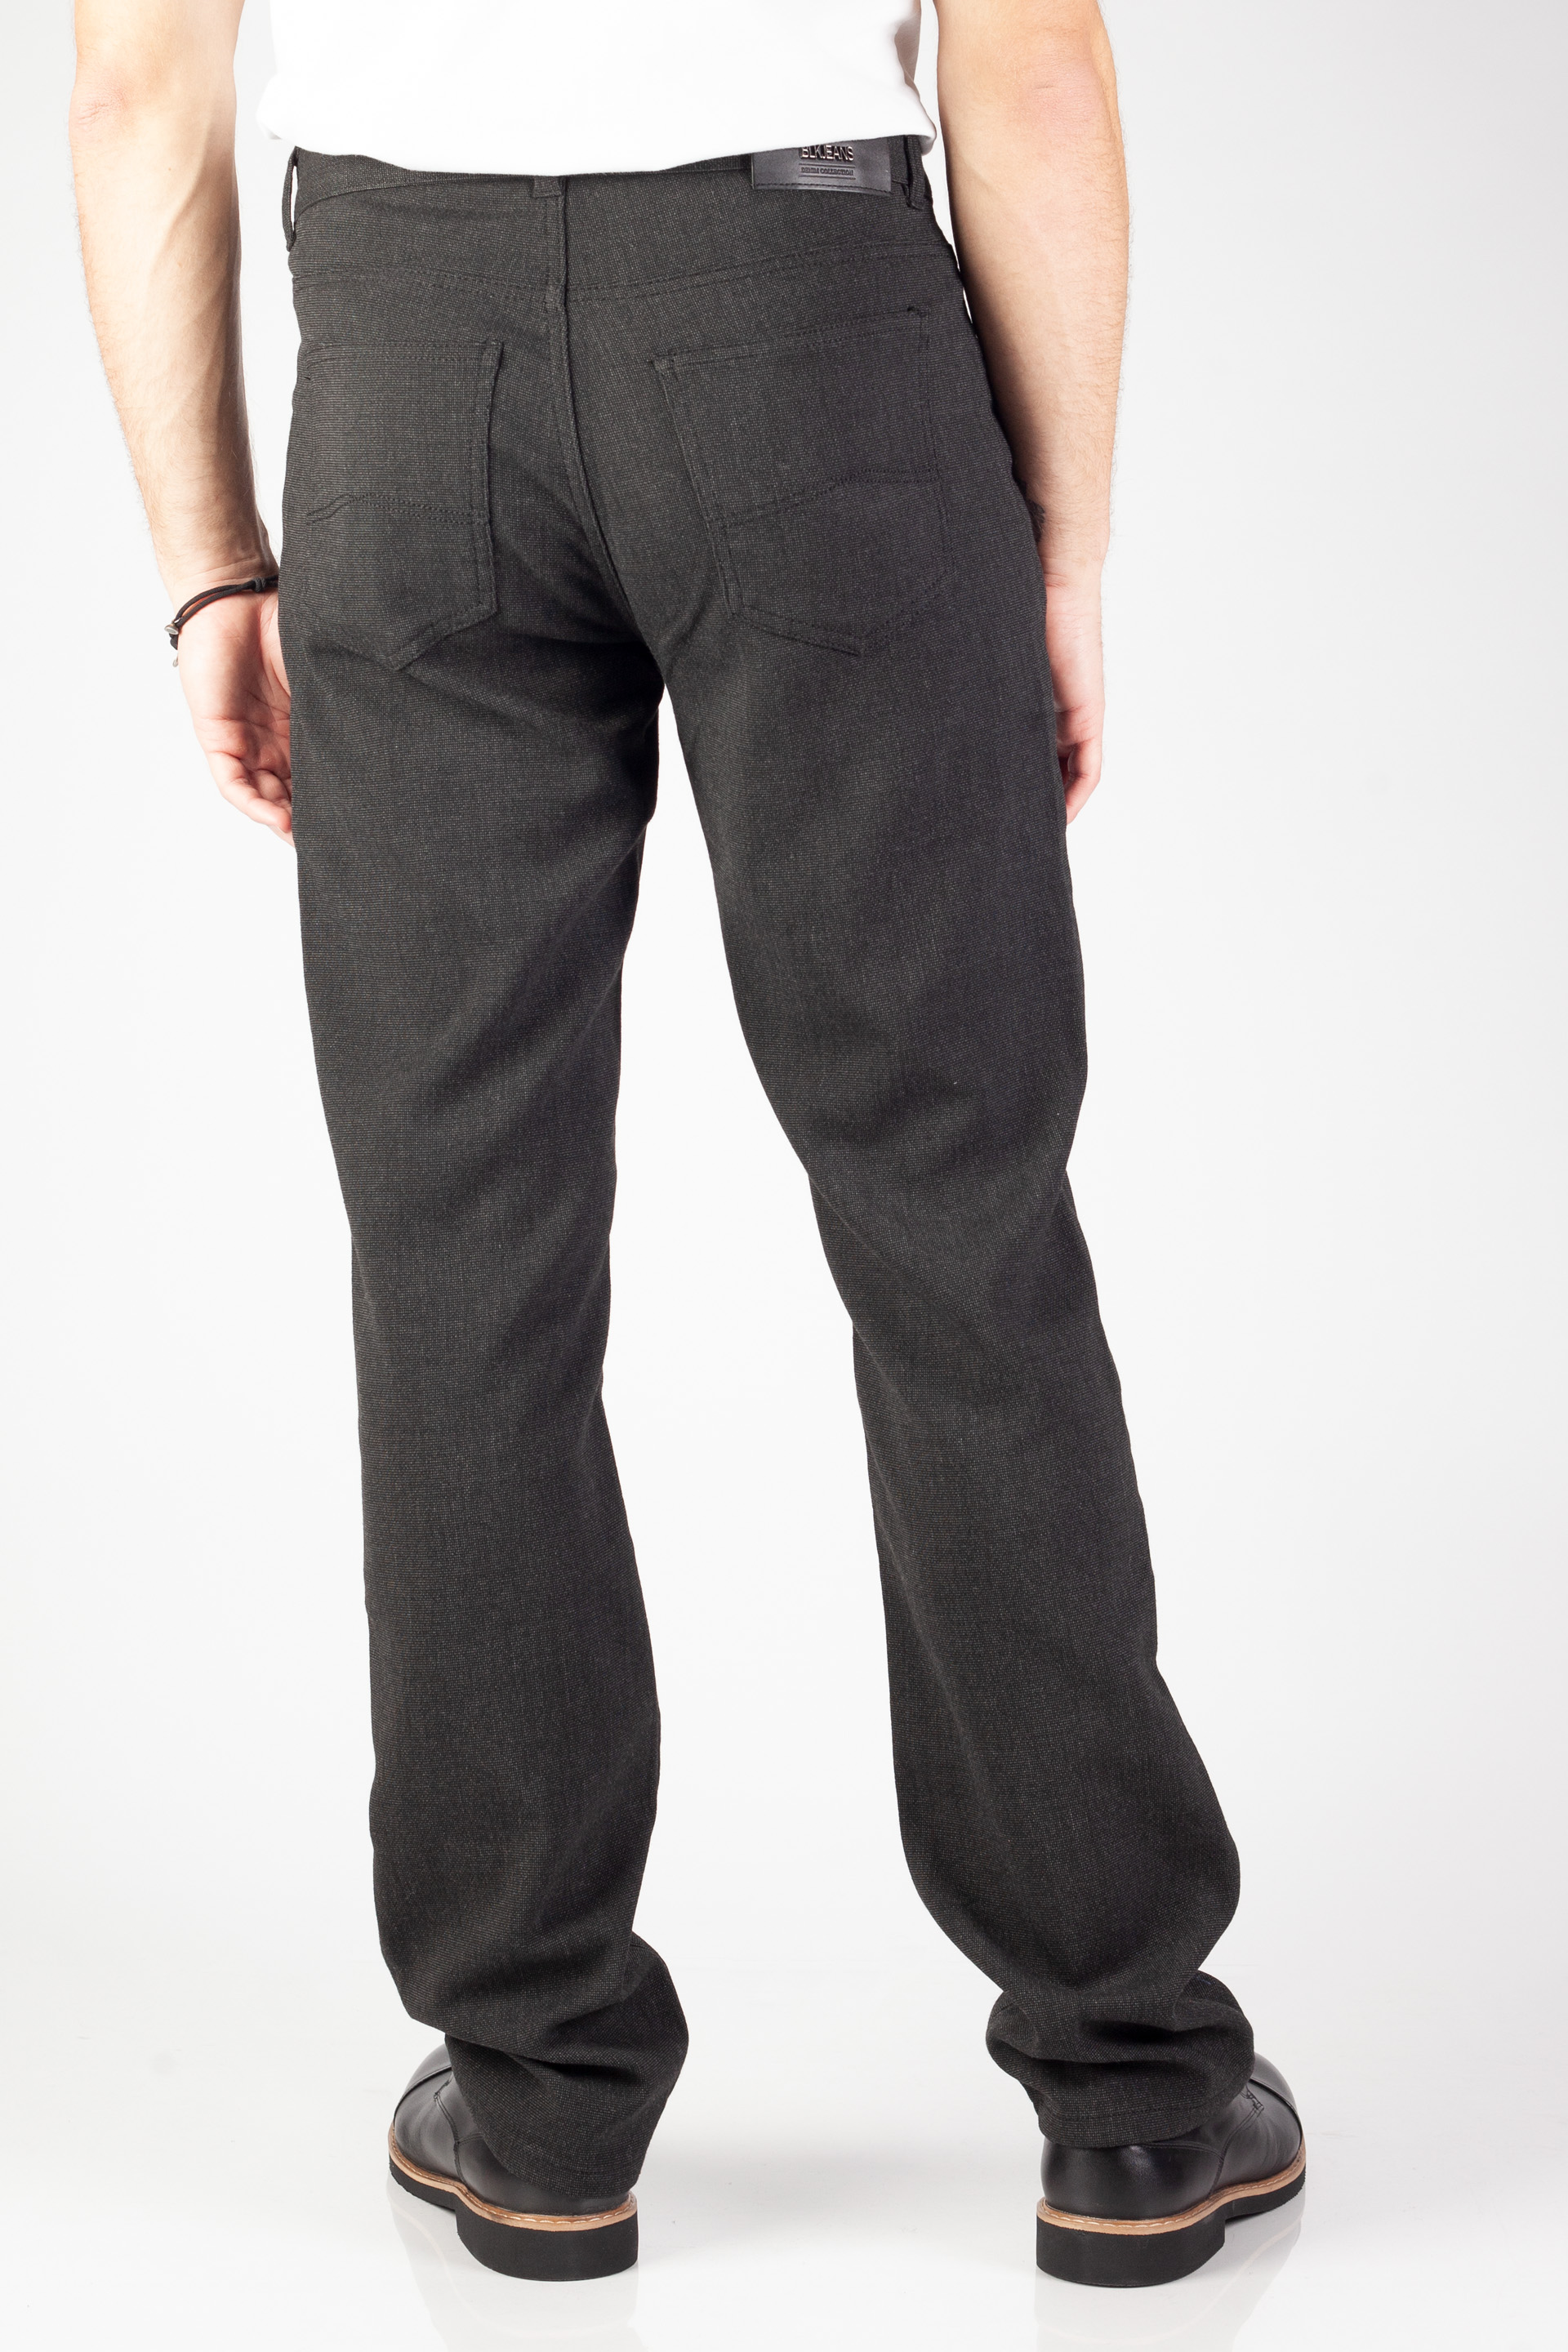 Chino pants BLK JEANS 8388-5178-101-201